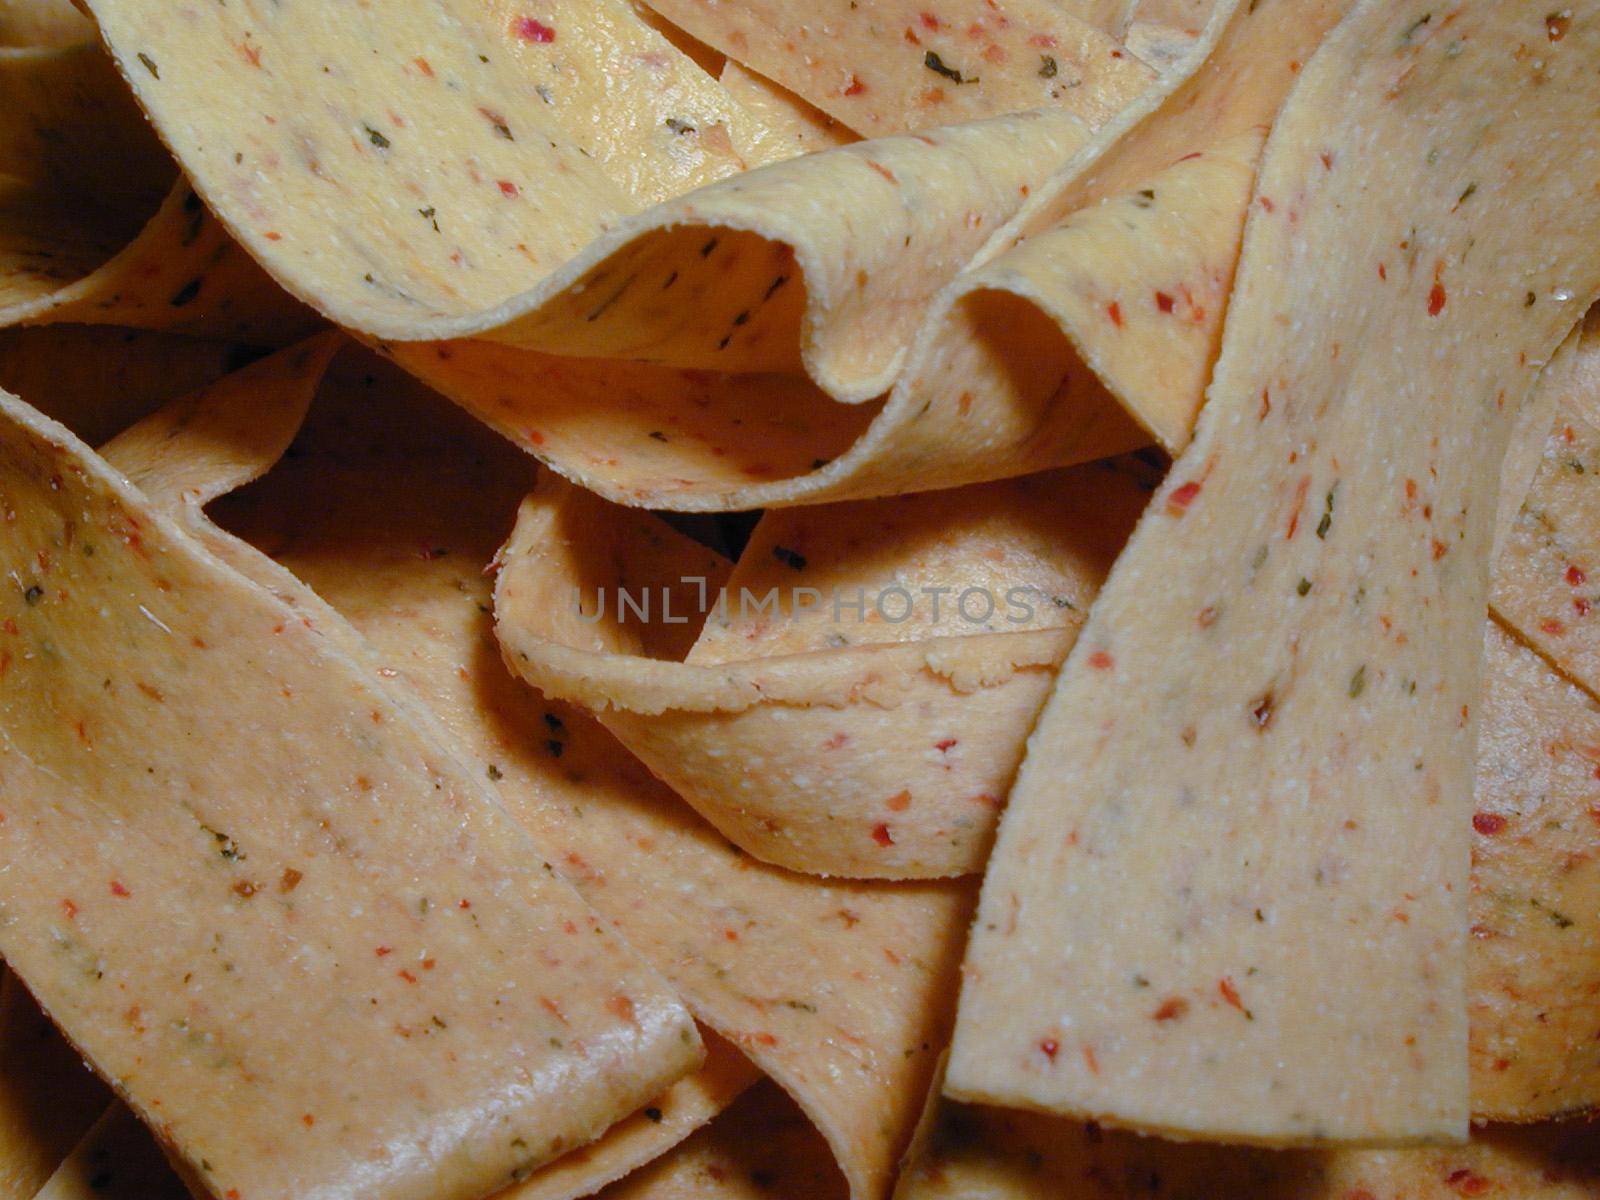 Ribbons of seasoned pasta with tomato and herbs in a cooking, catering or food background texture